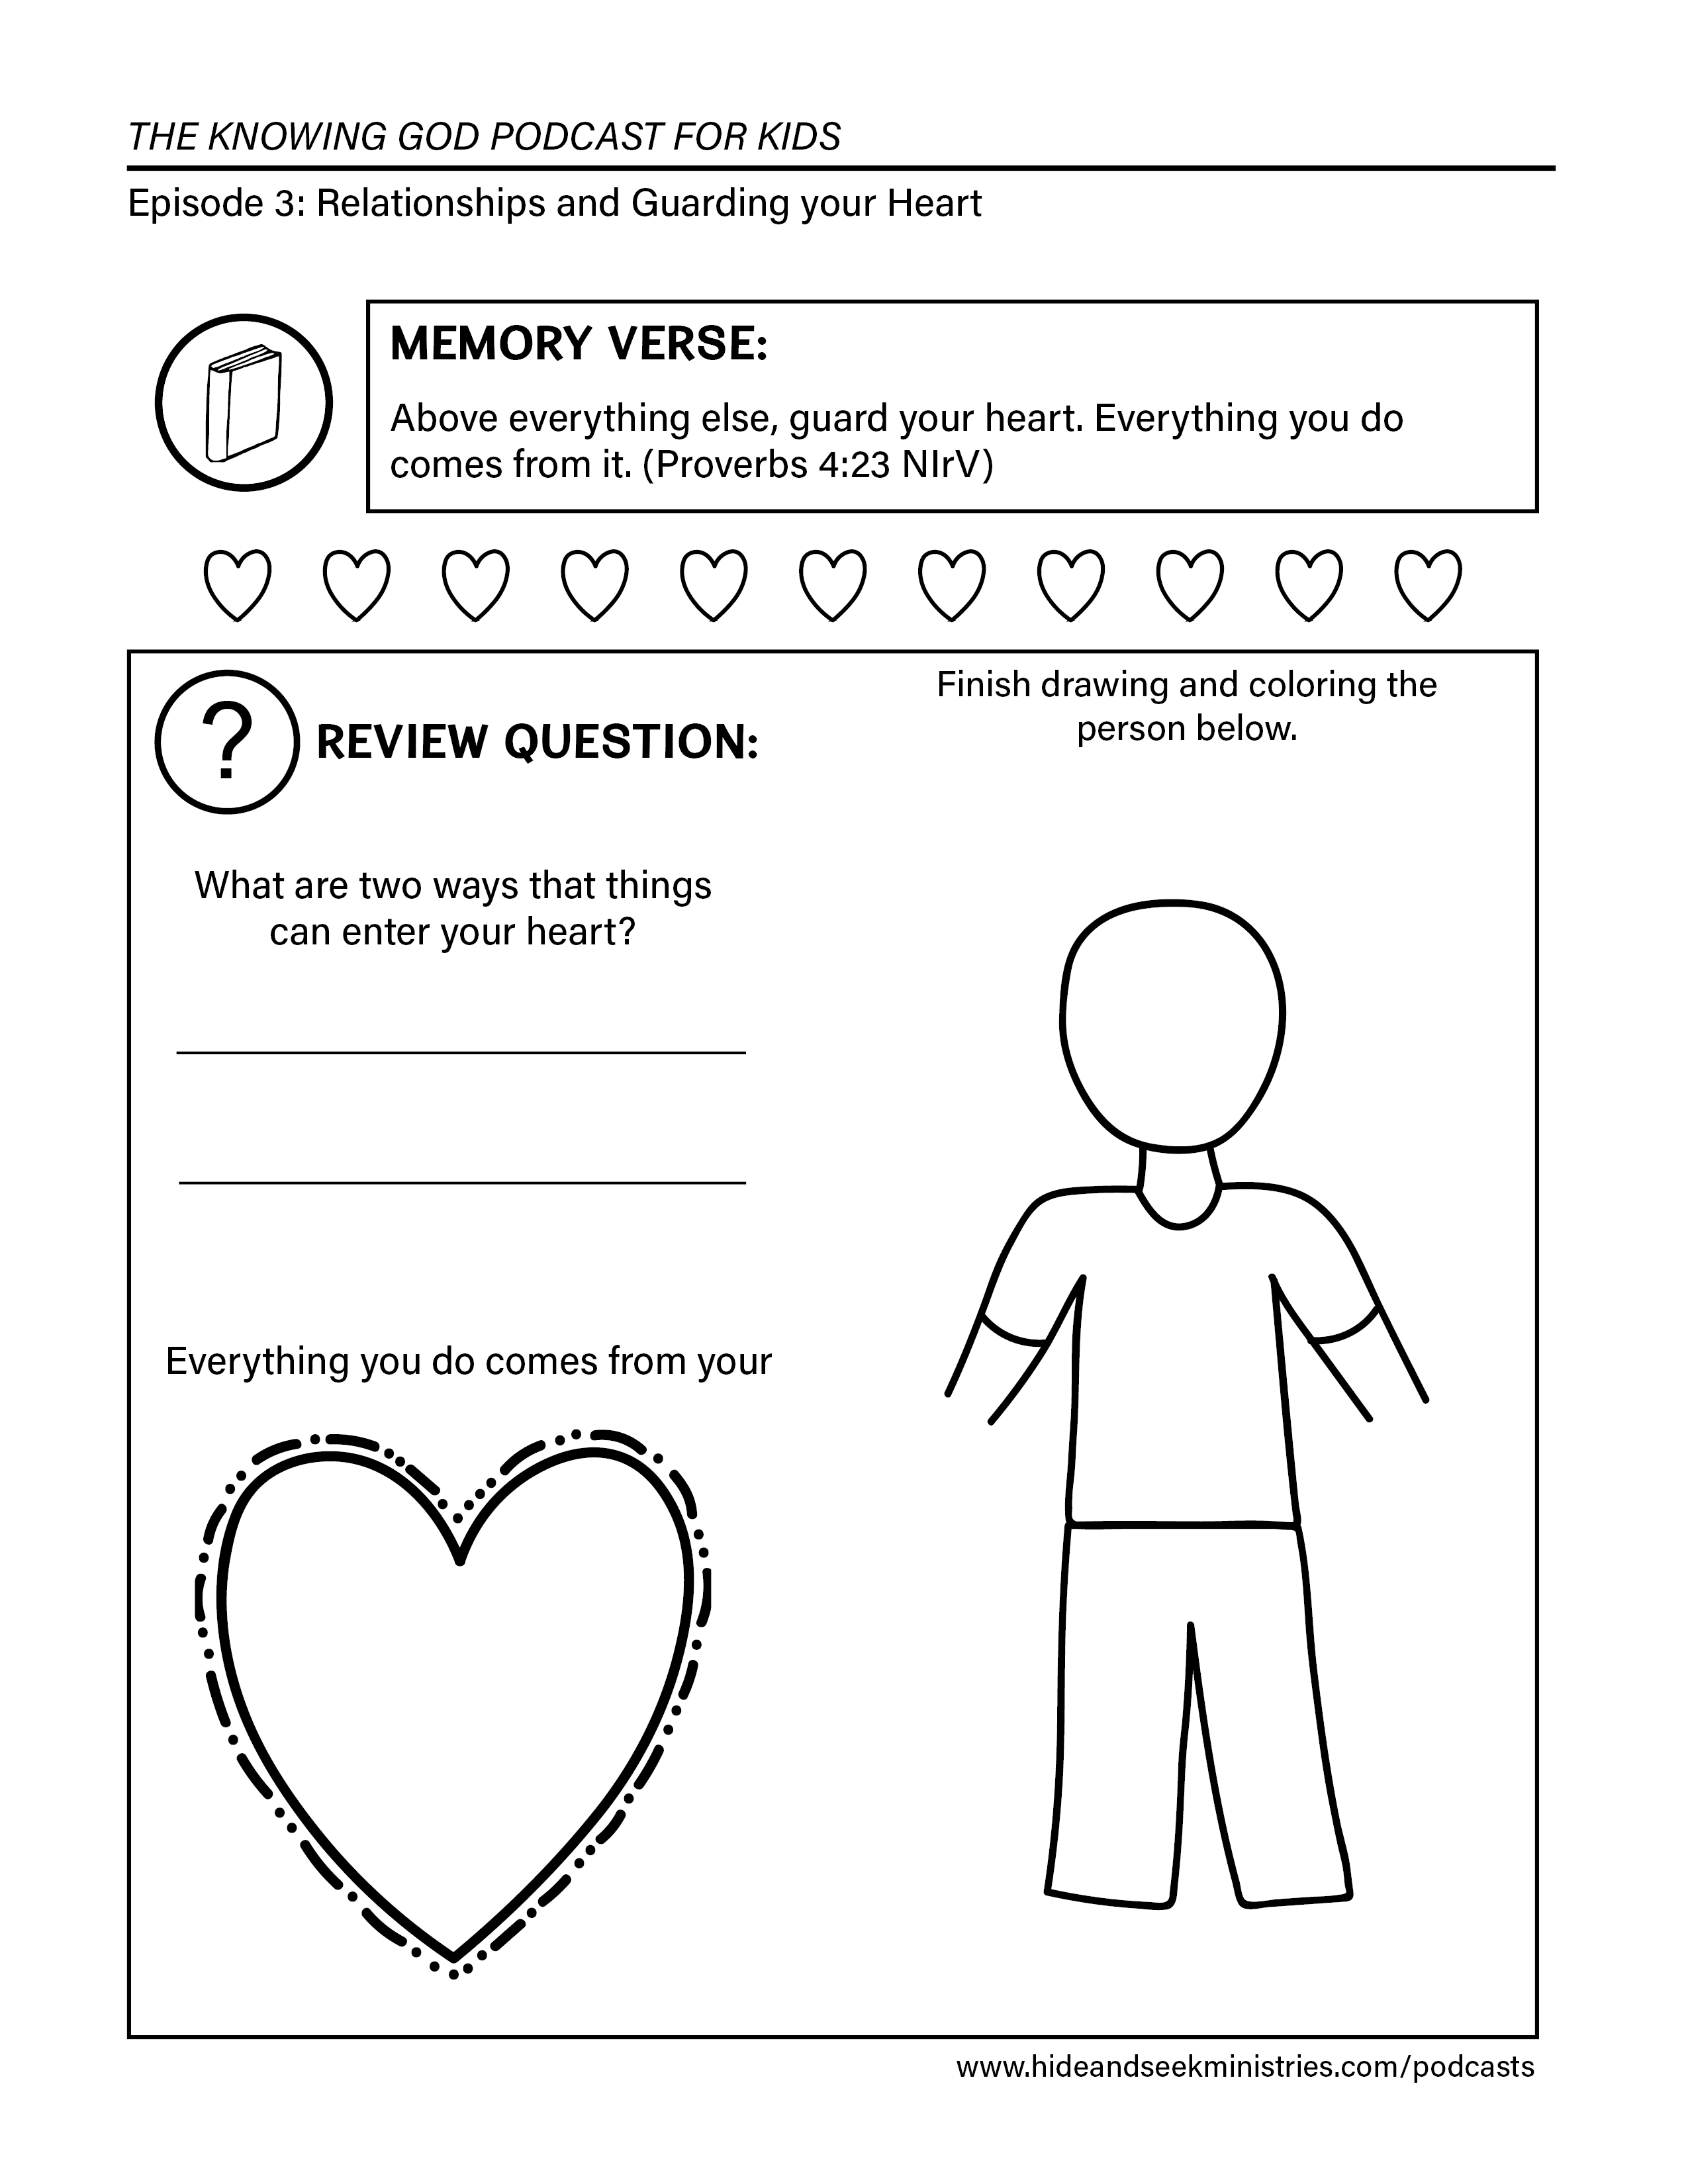 Free Printable Bible Activities. Easy To Download And Print. (This - Free Printable Bible Games For Kids